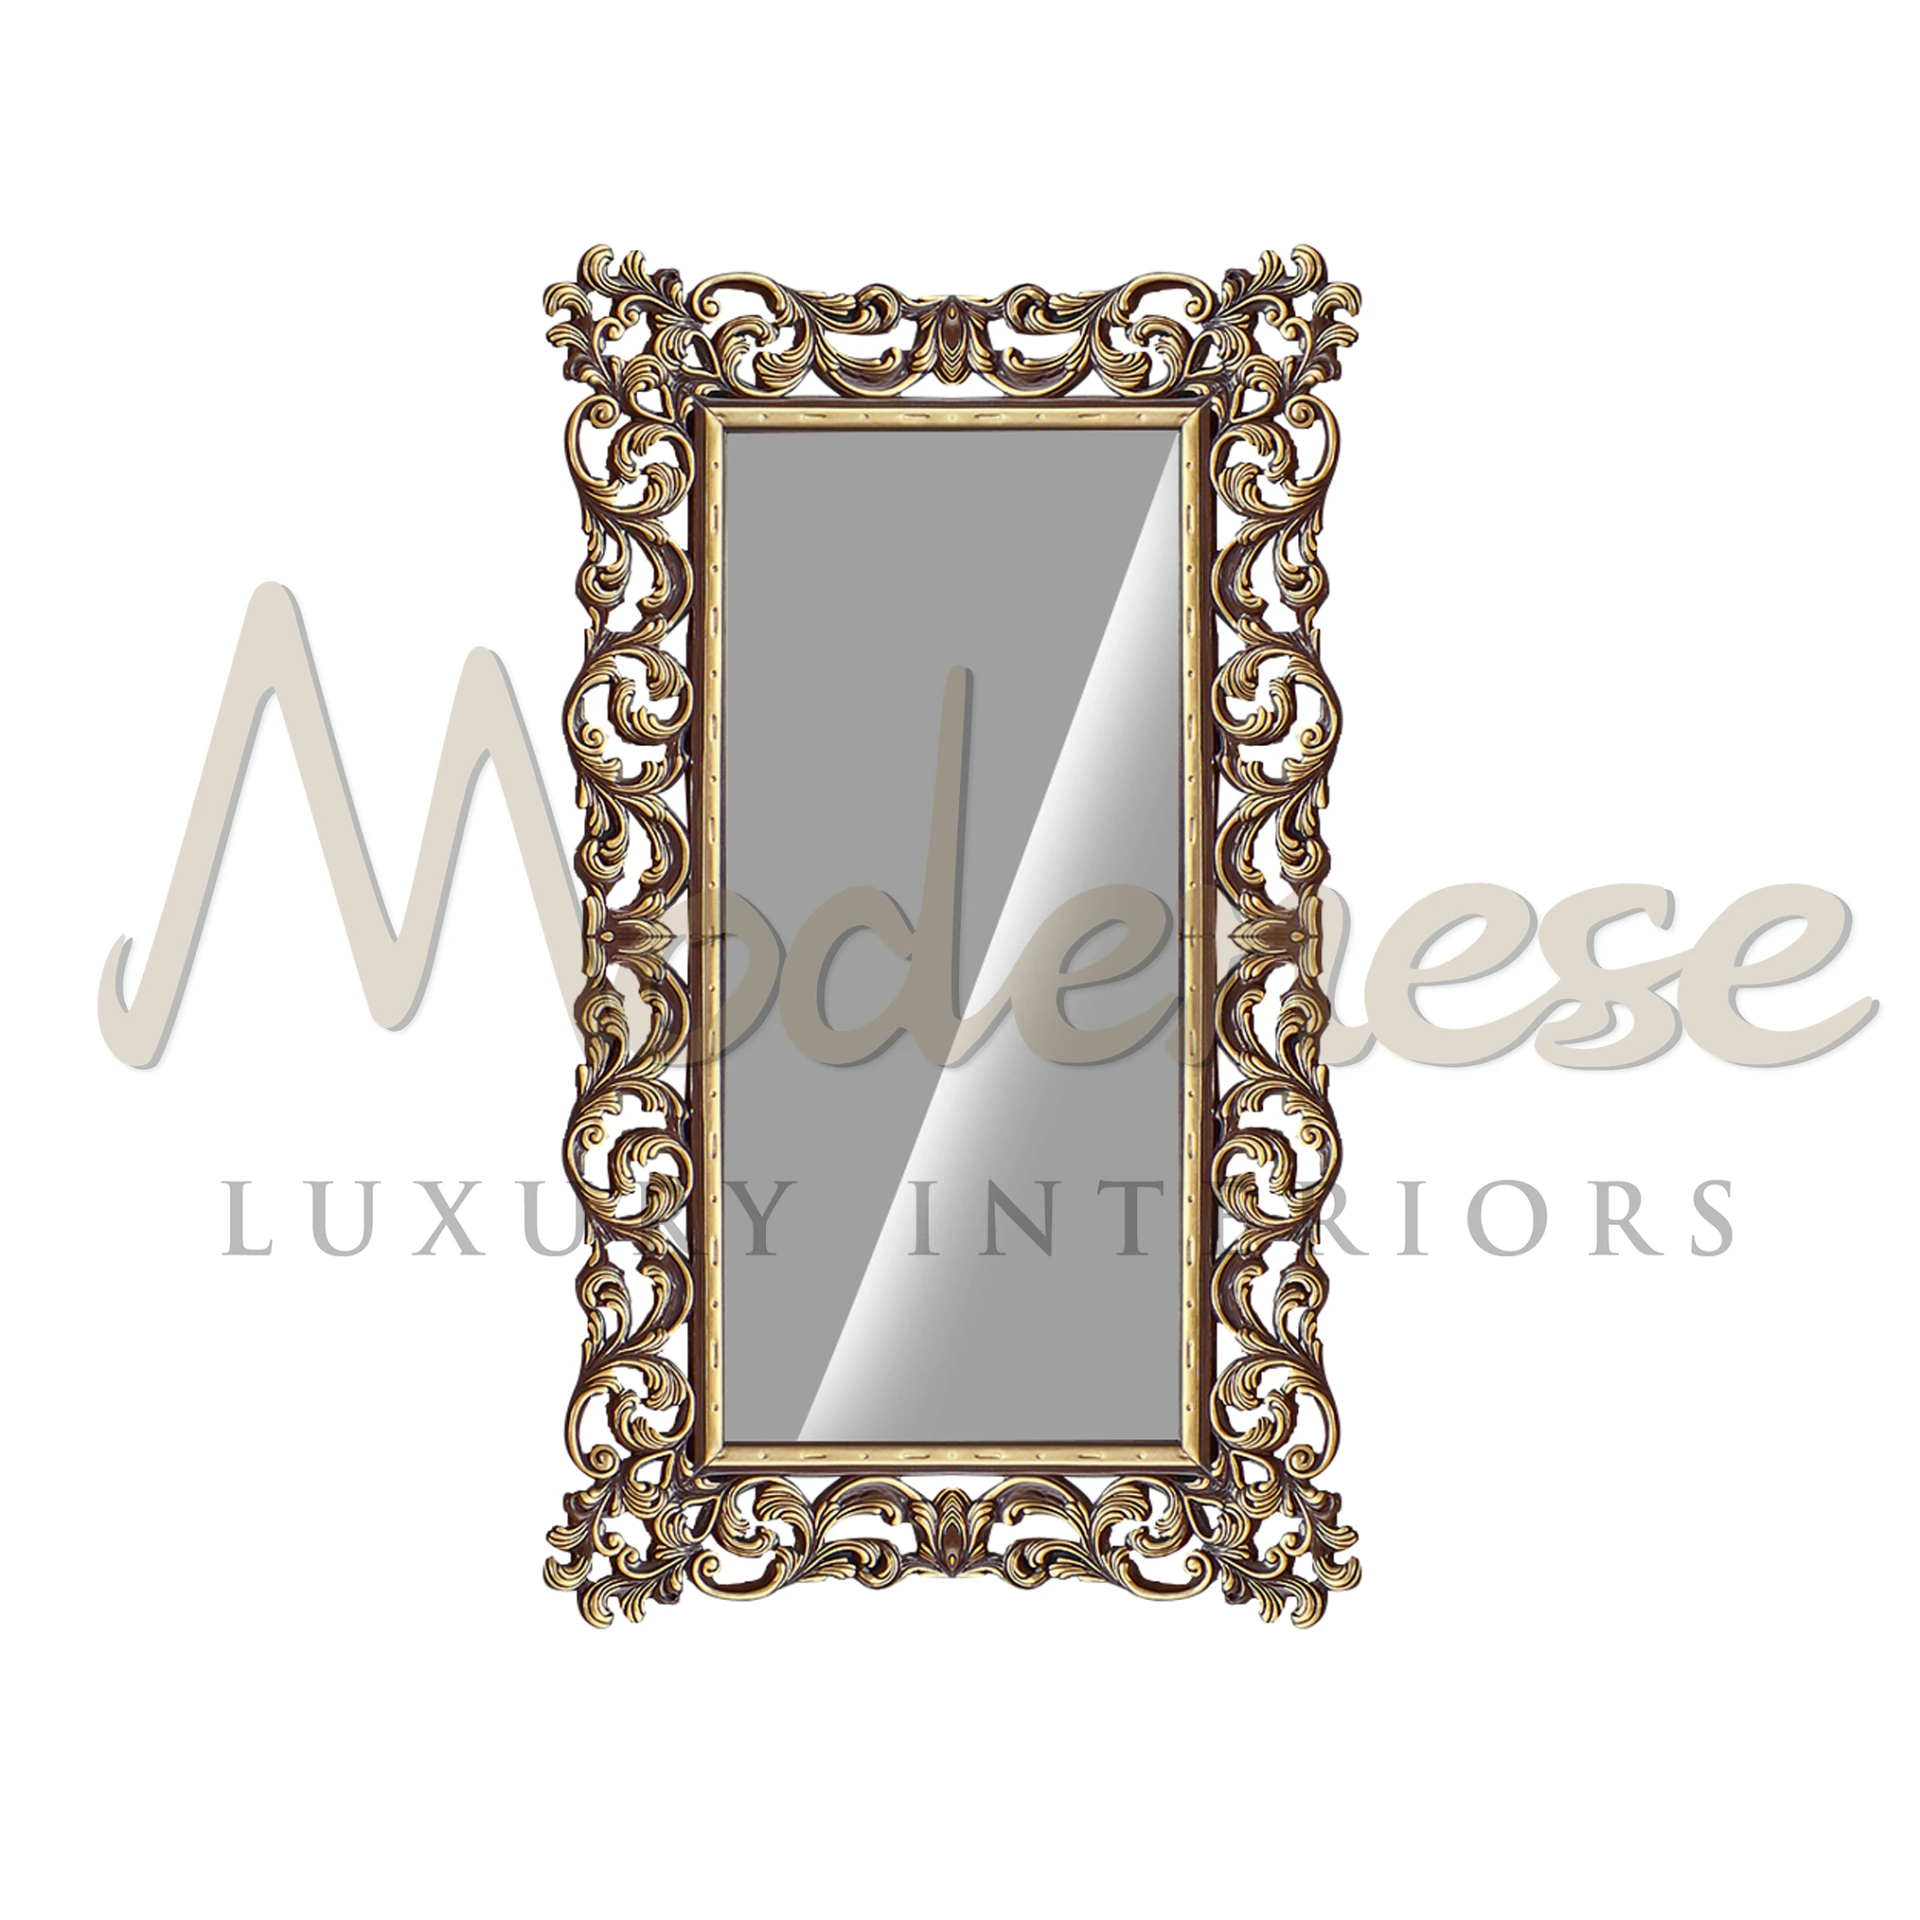 Elegant Figured Wall Mirror by Modenese, offering unique shapes and styles for luxury interior design.